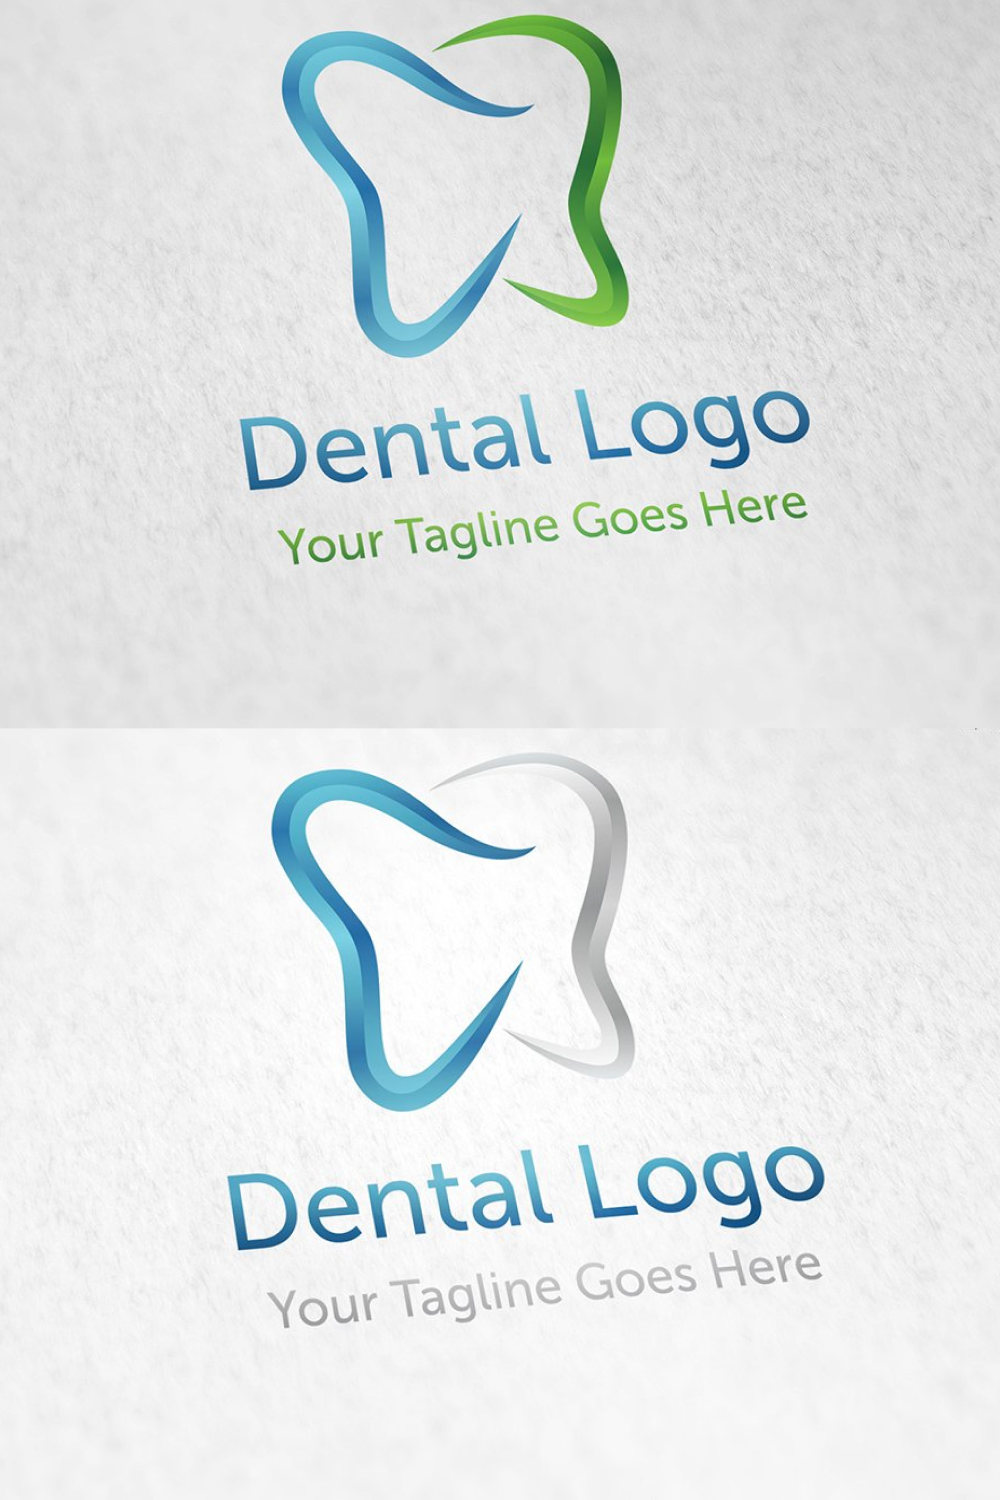 Logos of all possible options.